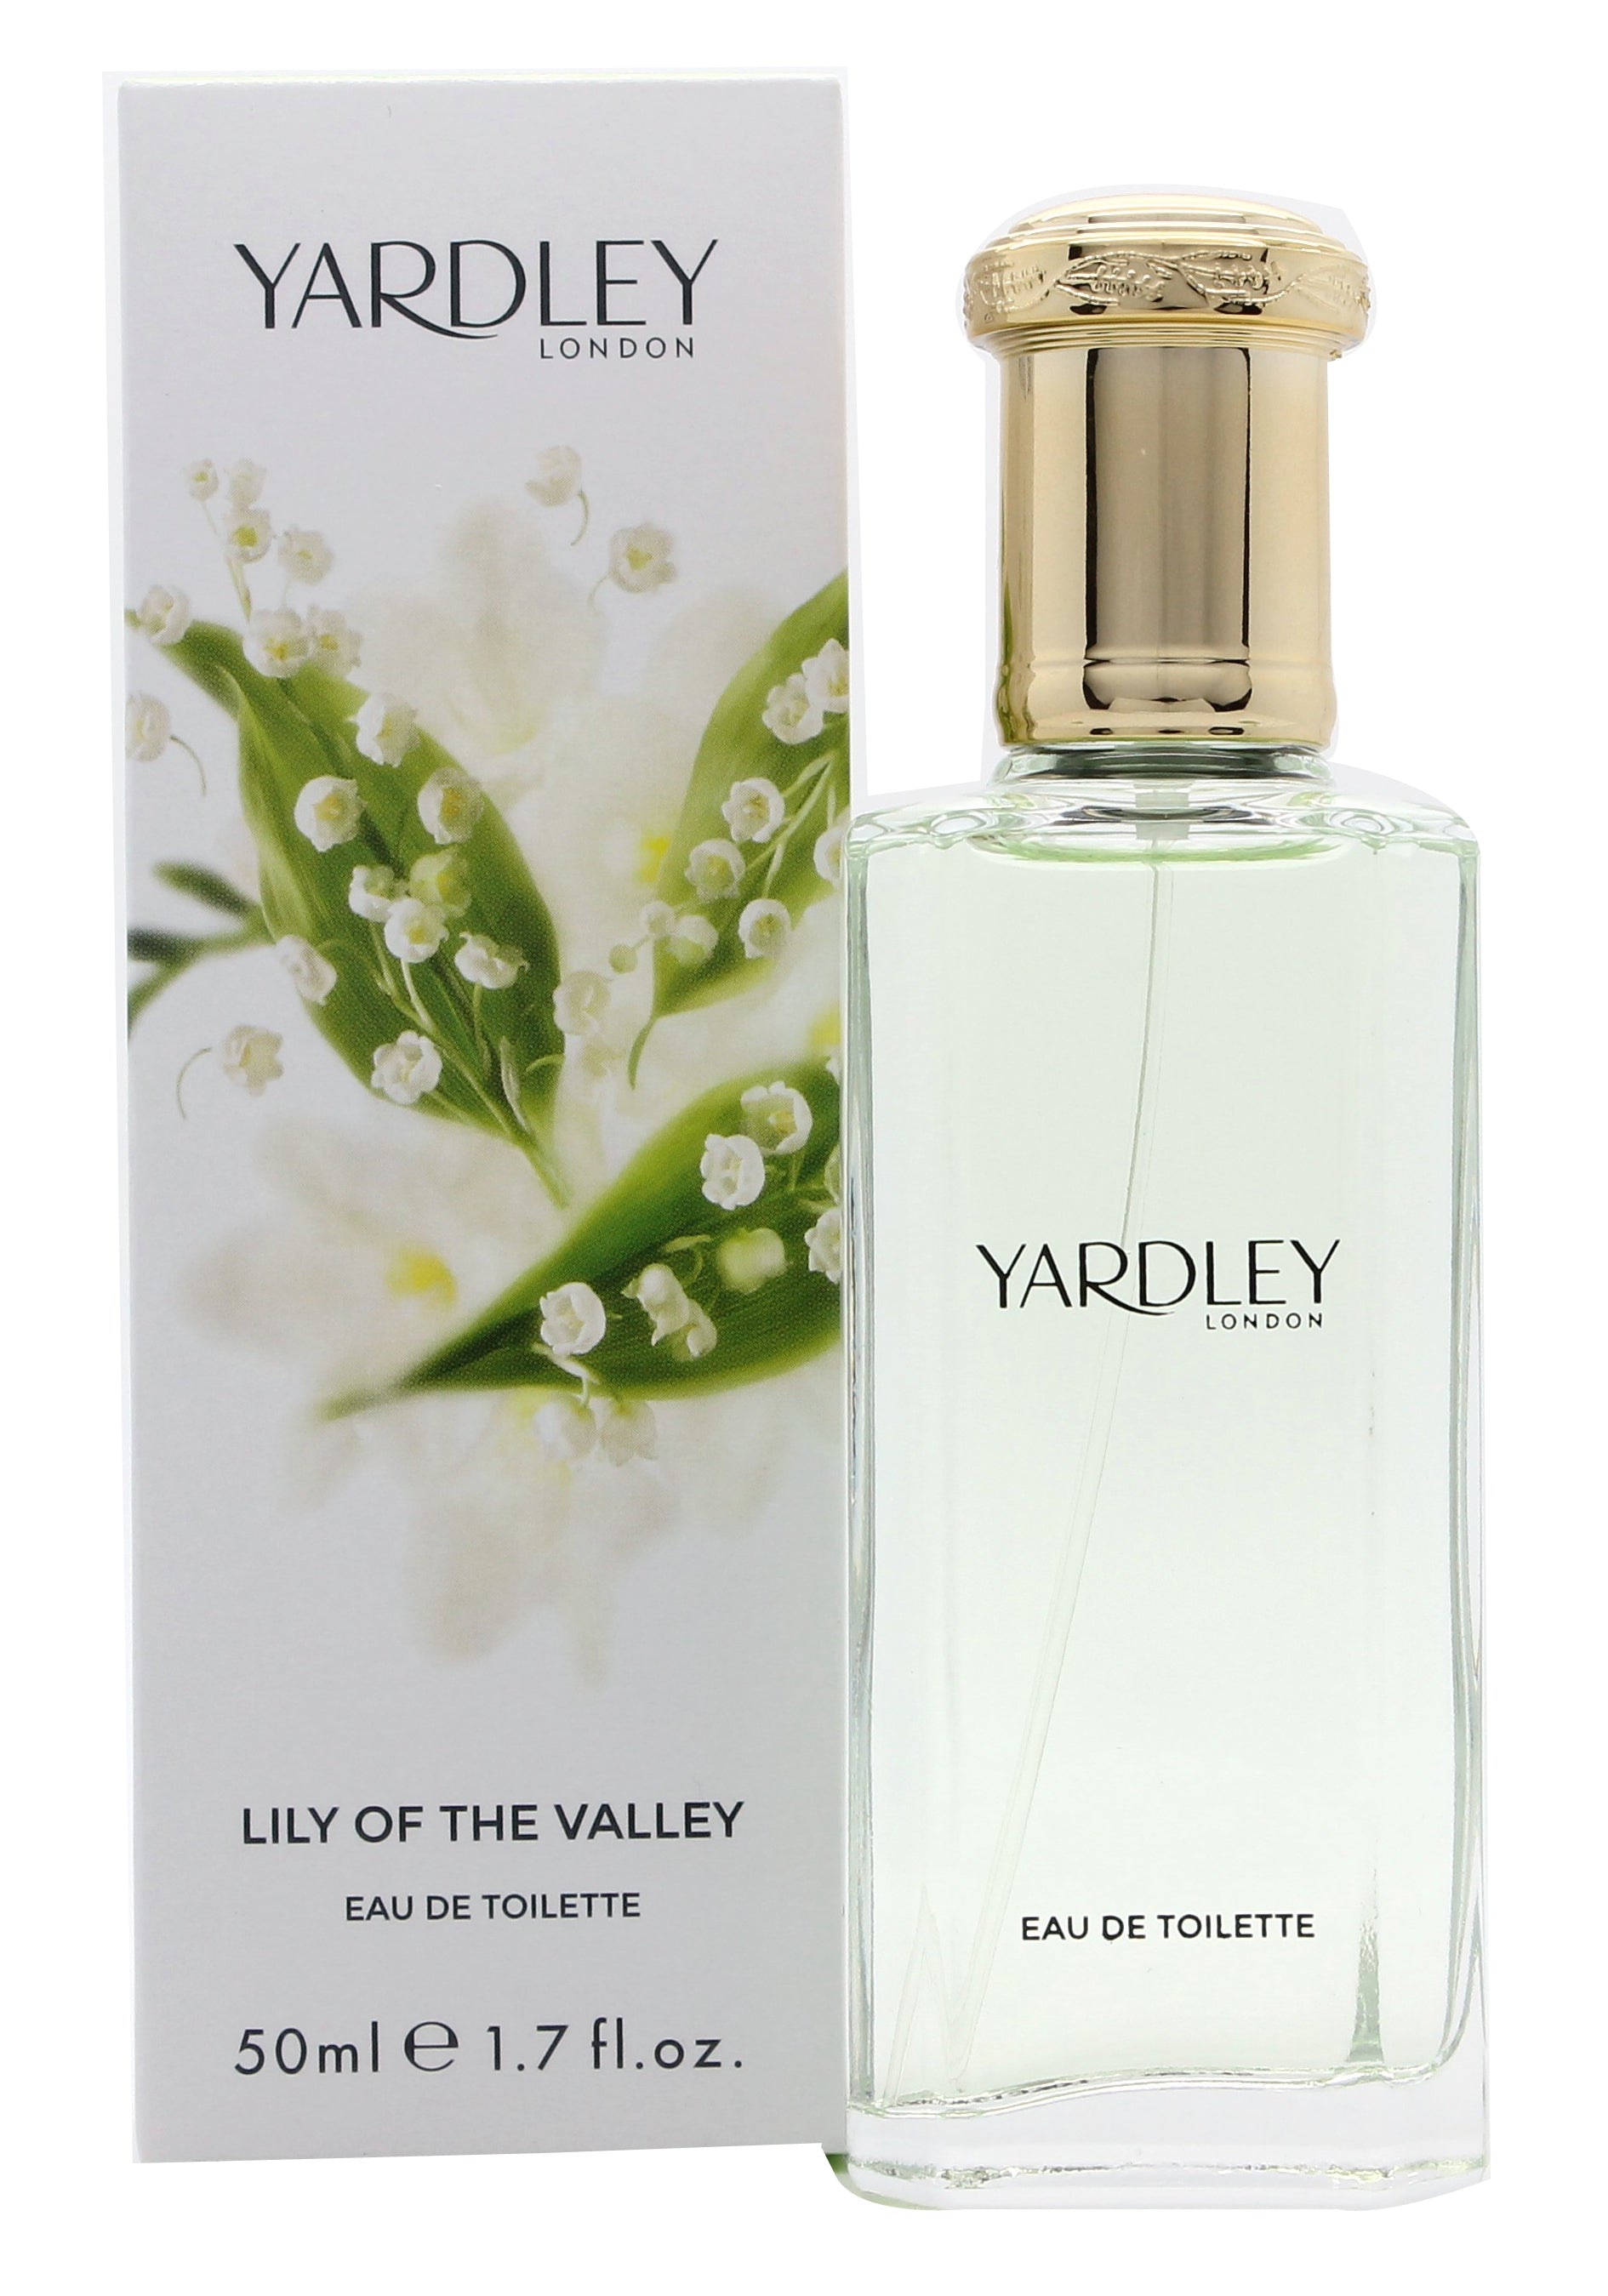 View Yardley Lily of the Valley Eau de Toilette 50ml Spray information